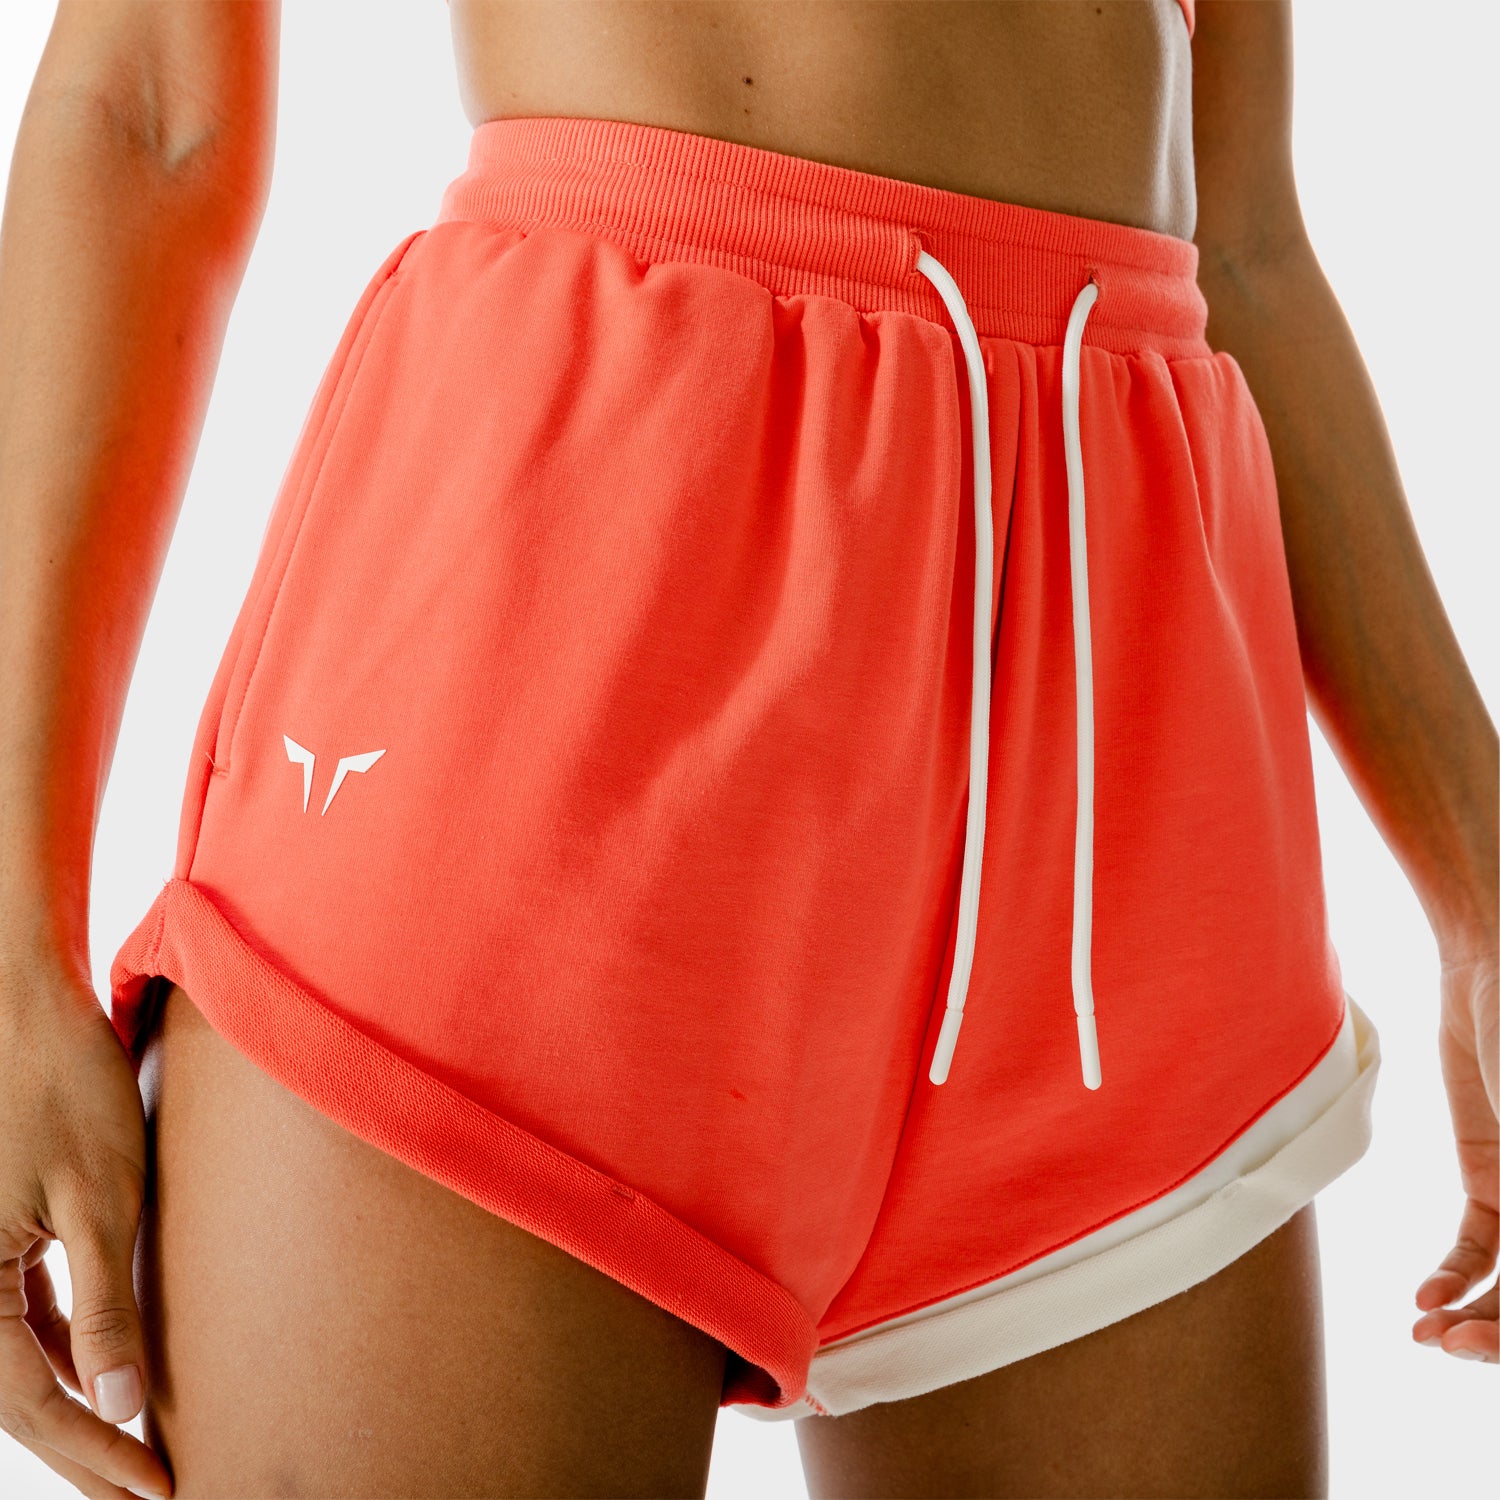 AE, LAB Shorts - Hot Coral, Workout Shorts Women